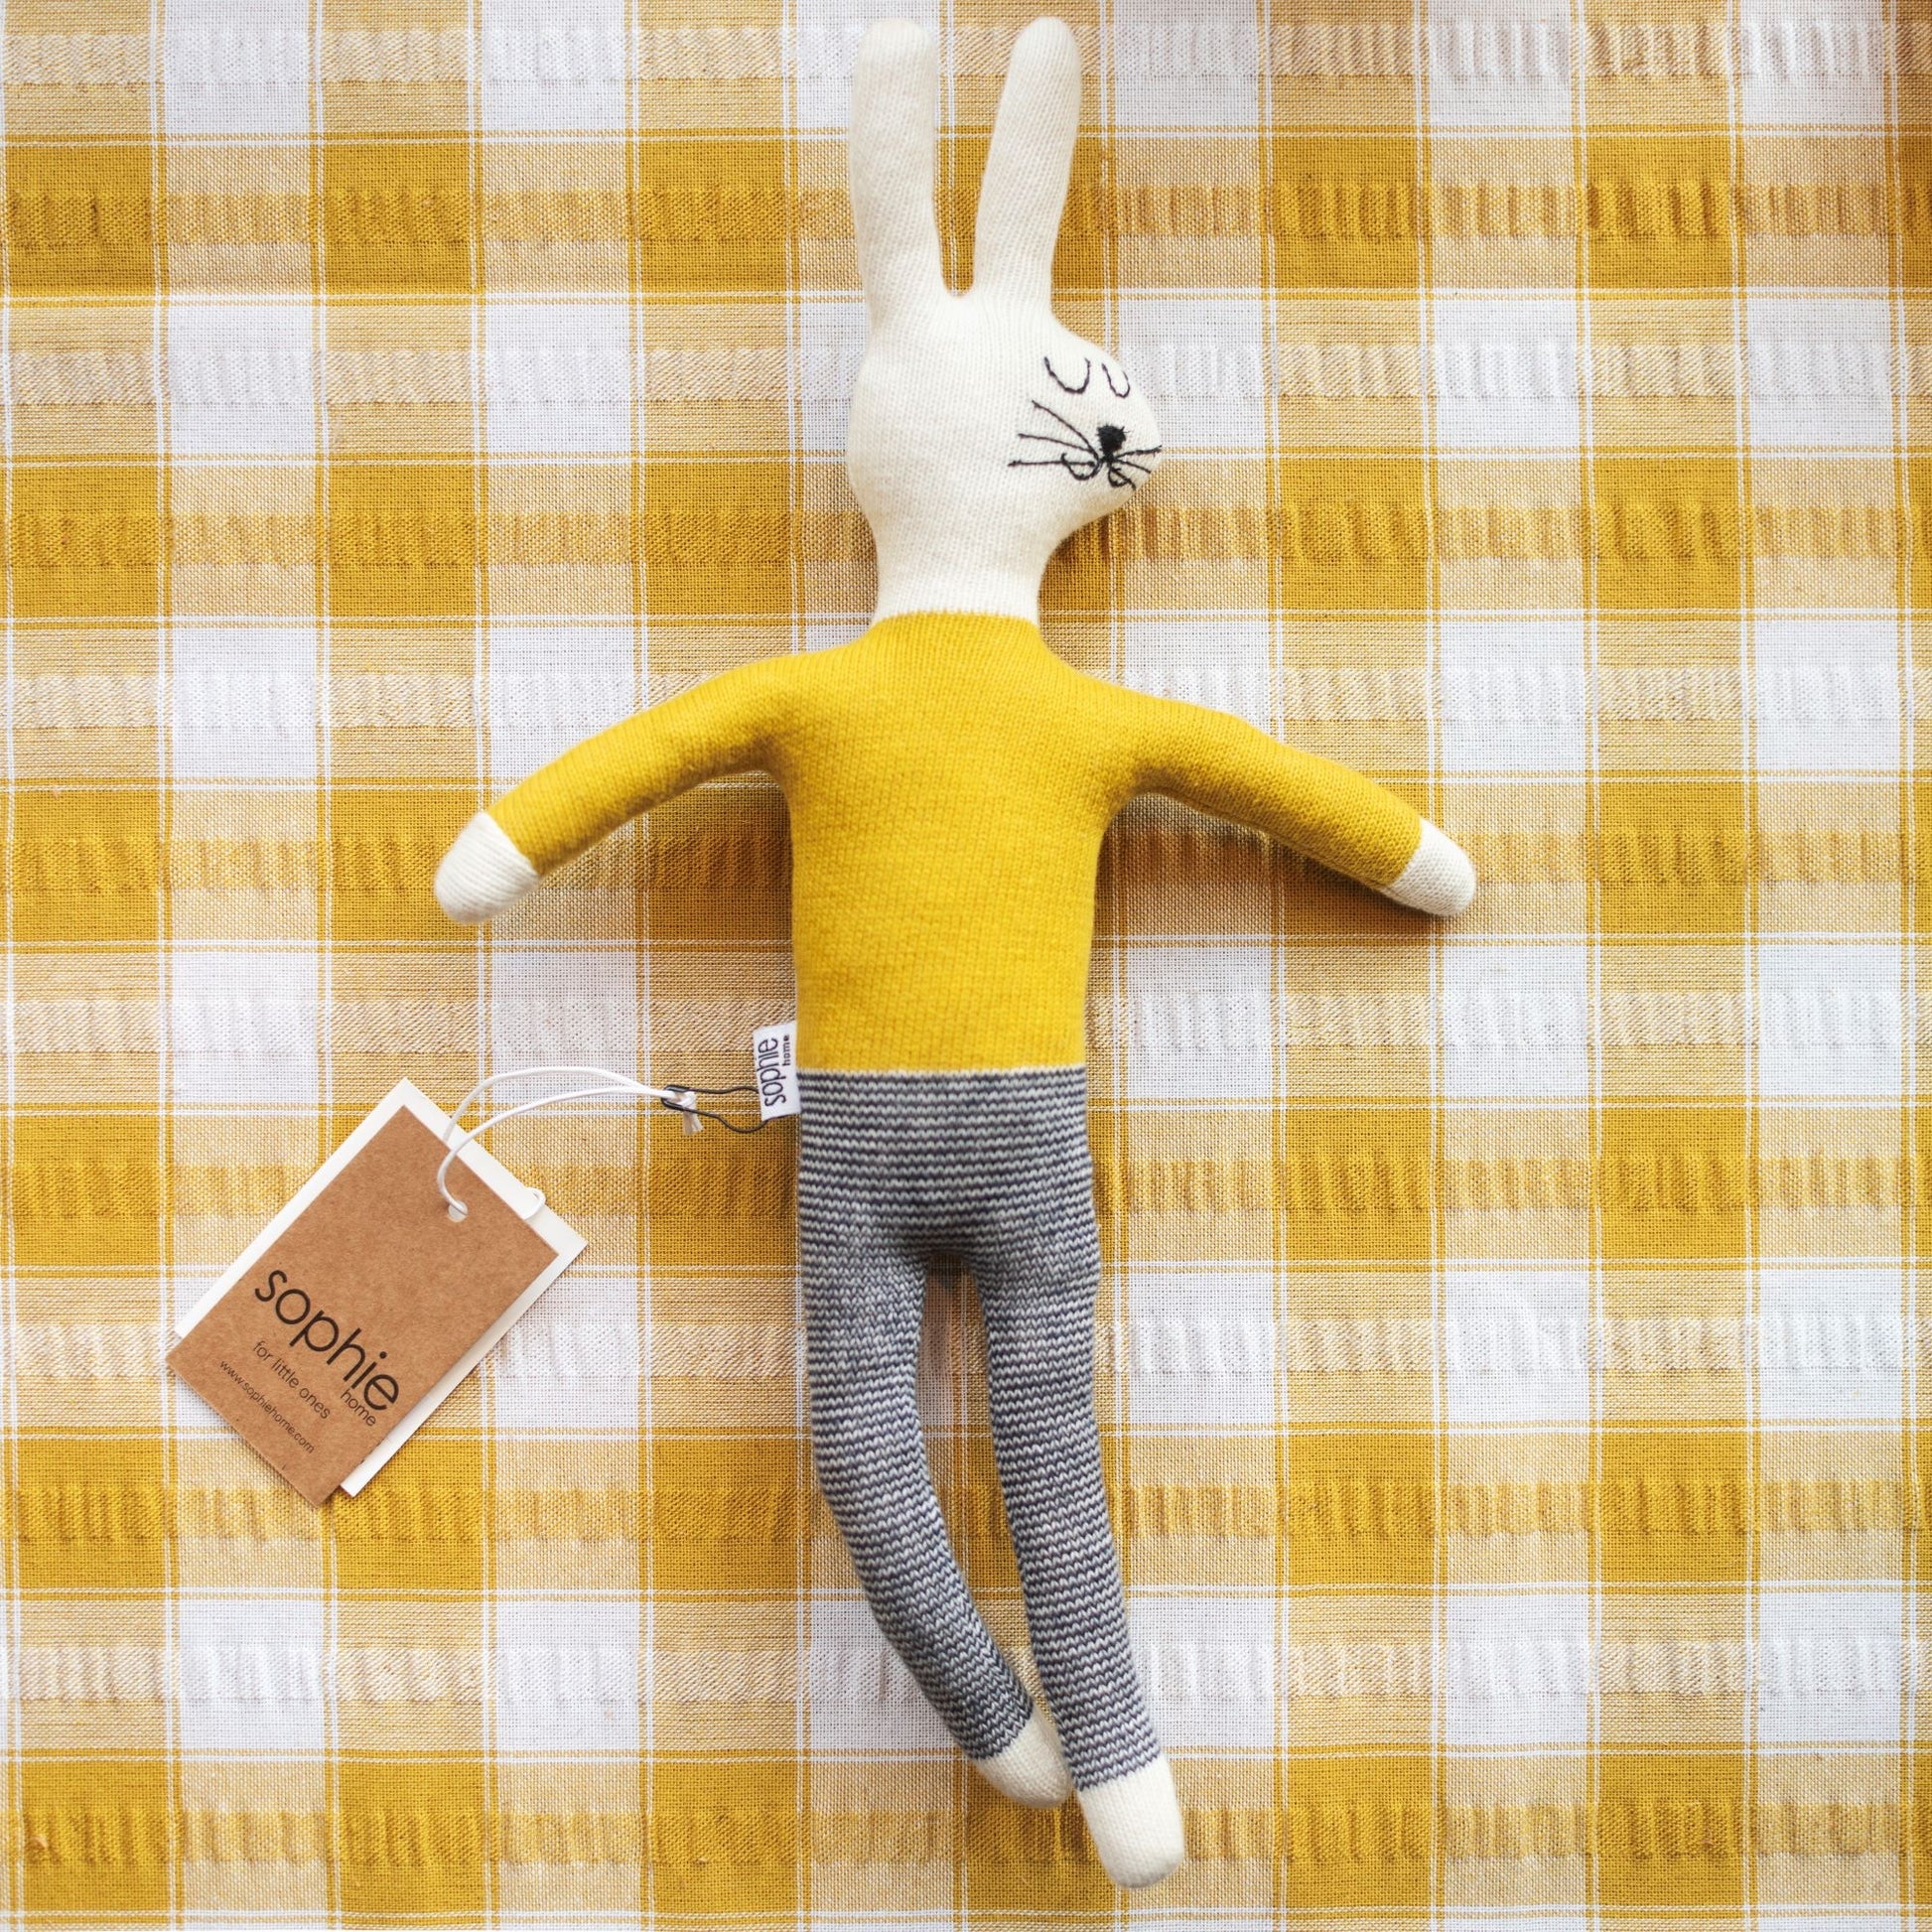 Cotton Knit Stuffed Animal Soft Toy - Citrus Rabbit - The Bristol Artisan Handmade Sustainable Gifts and Homewares.